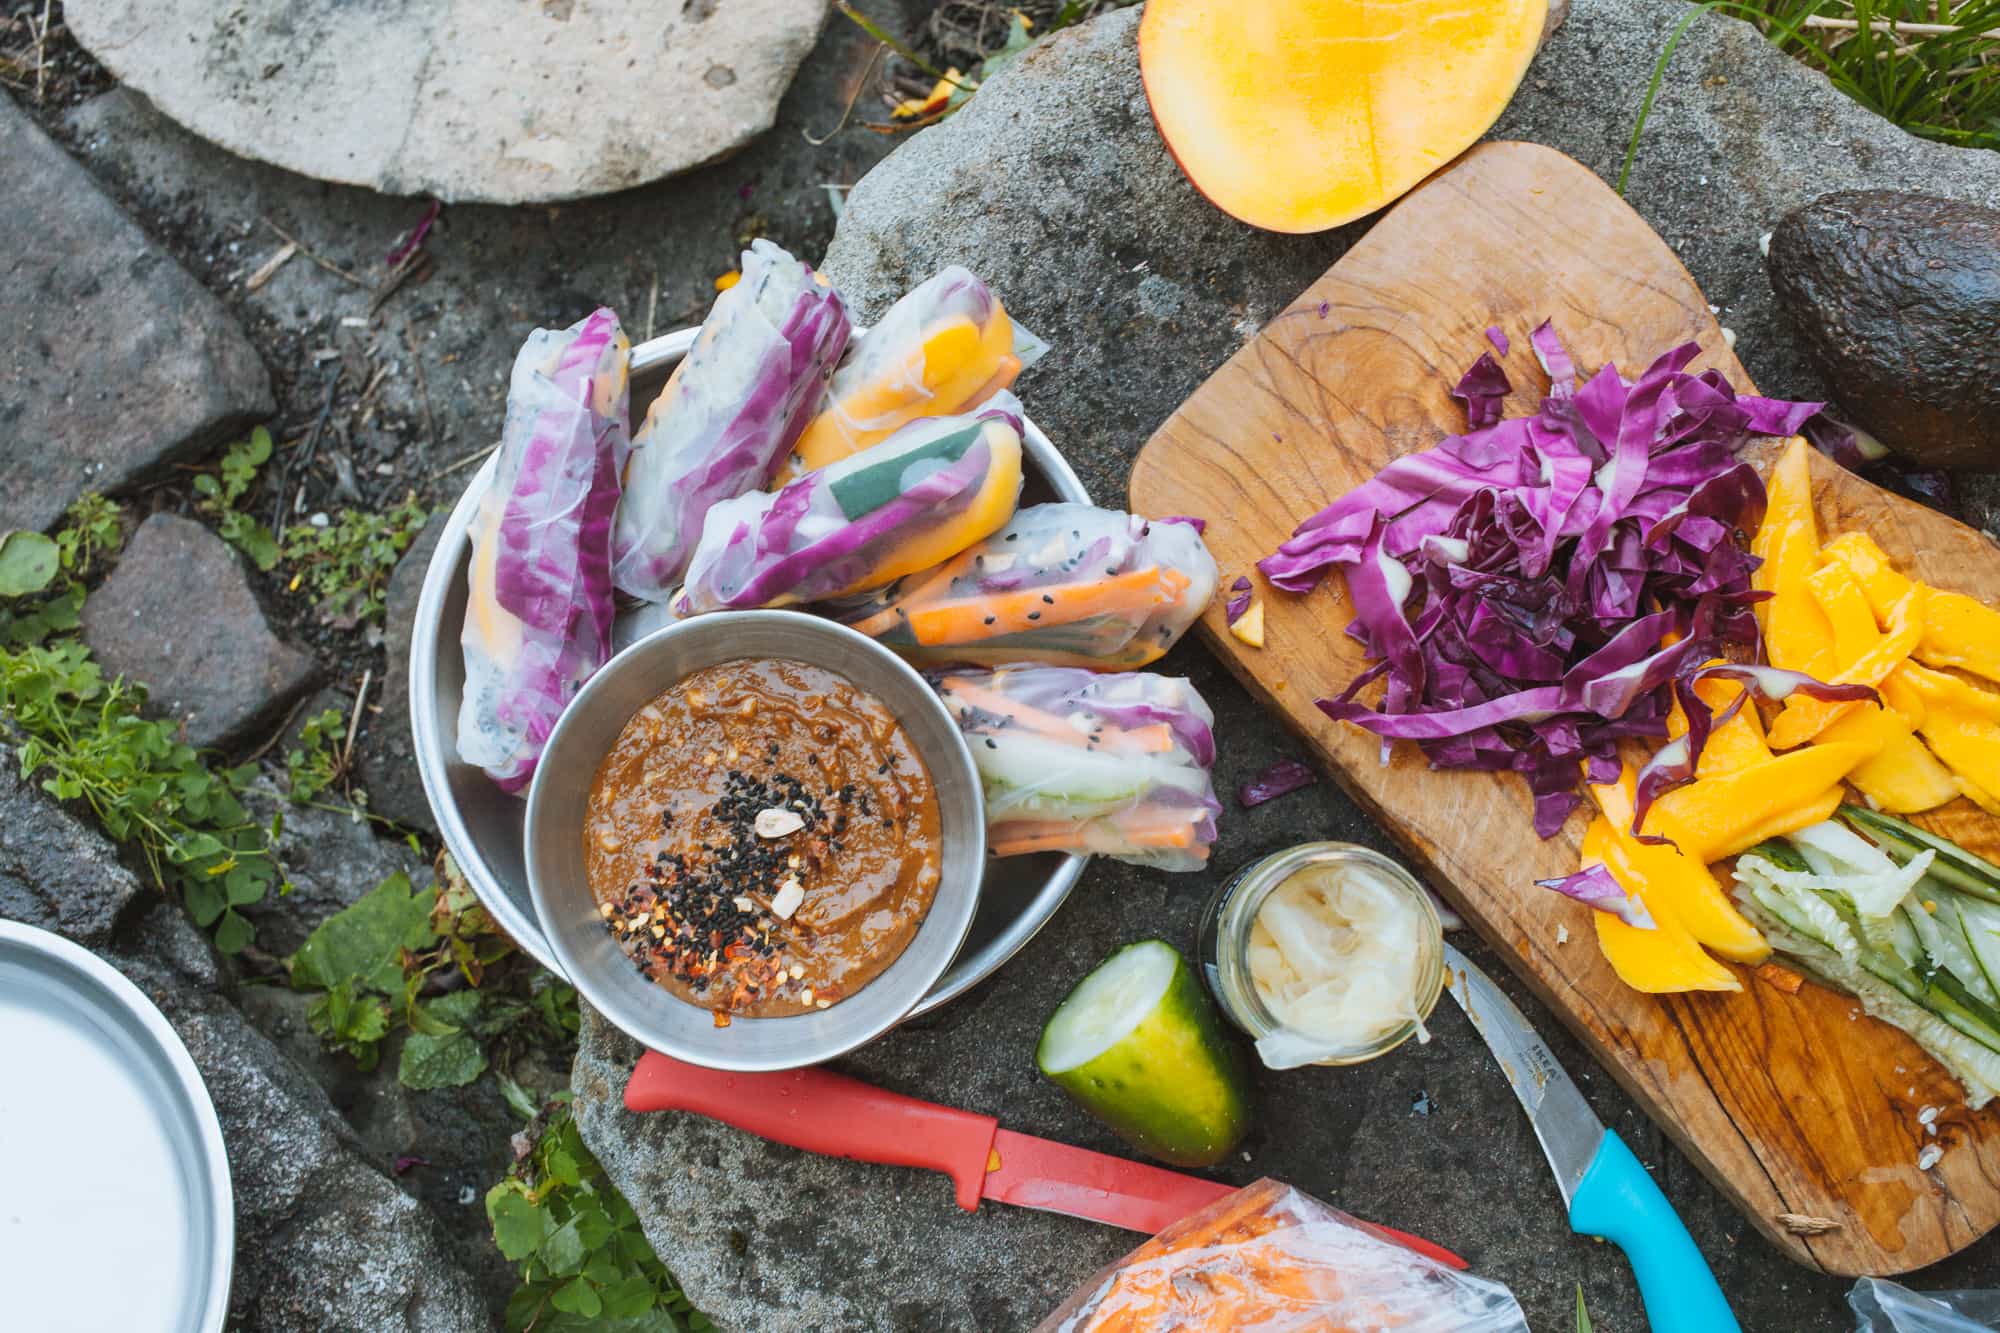 Summer rolls on a plate in a natural setting with chopped ingredients